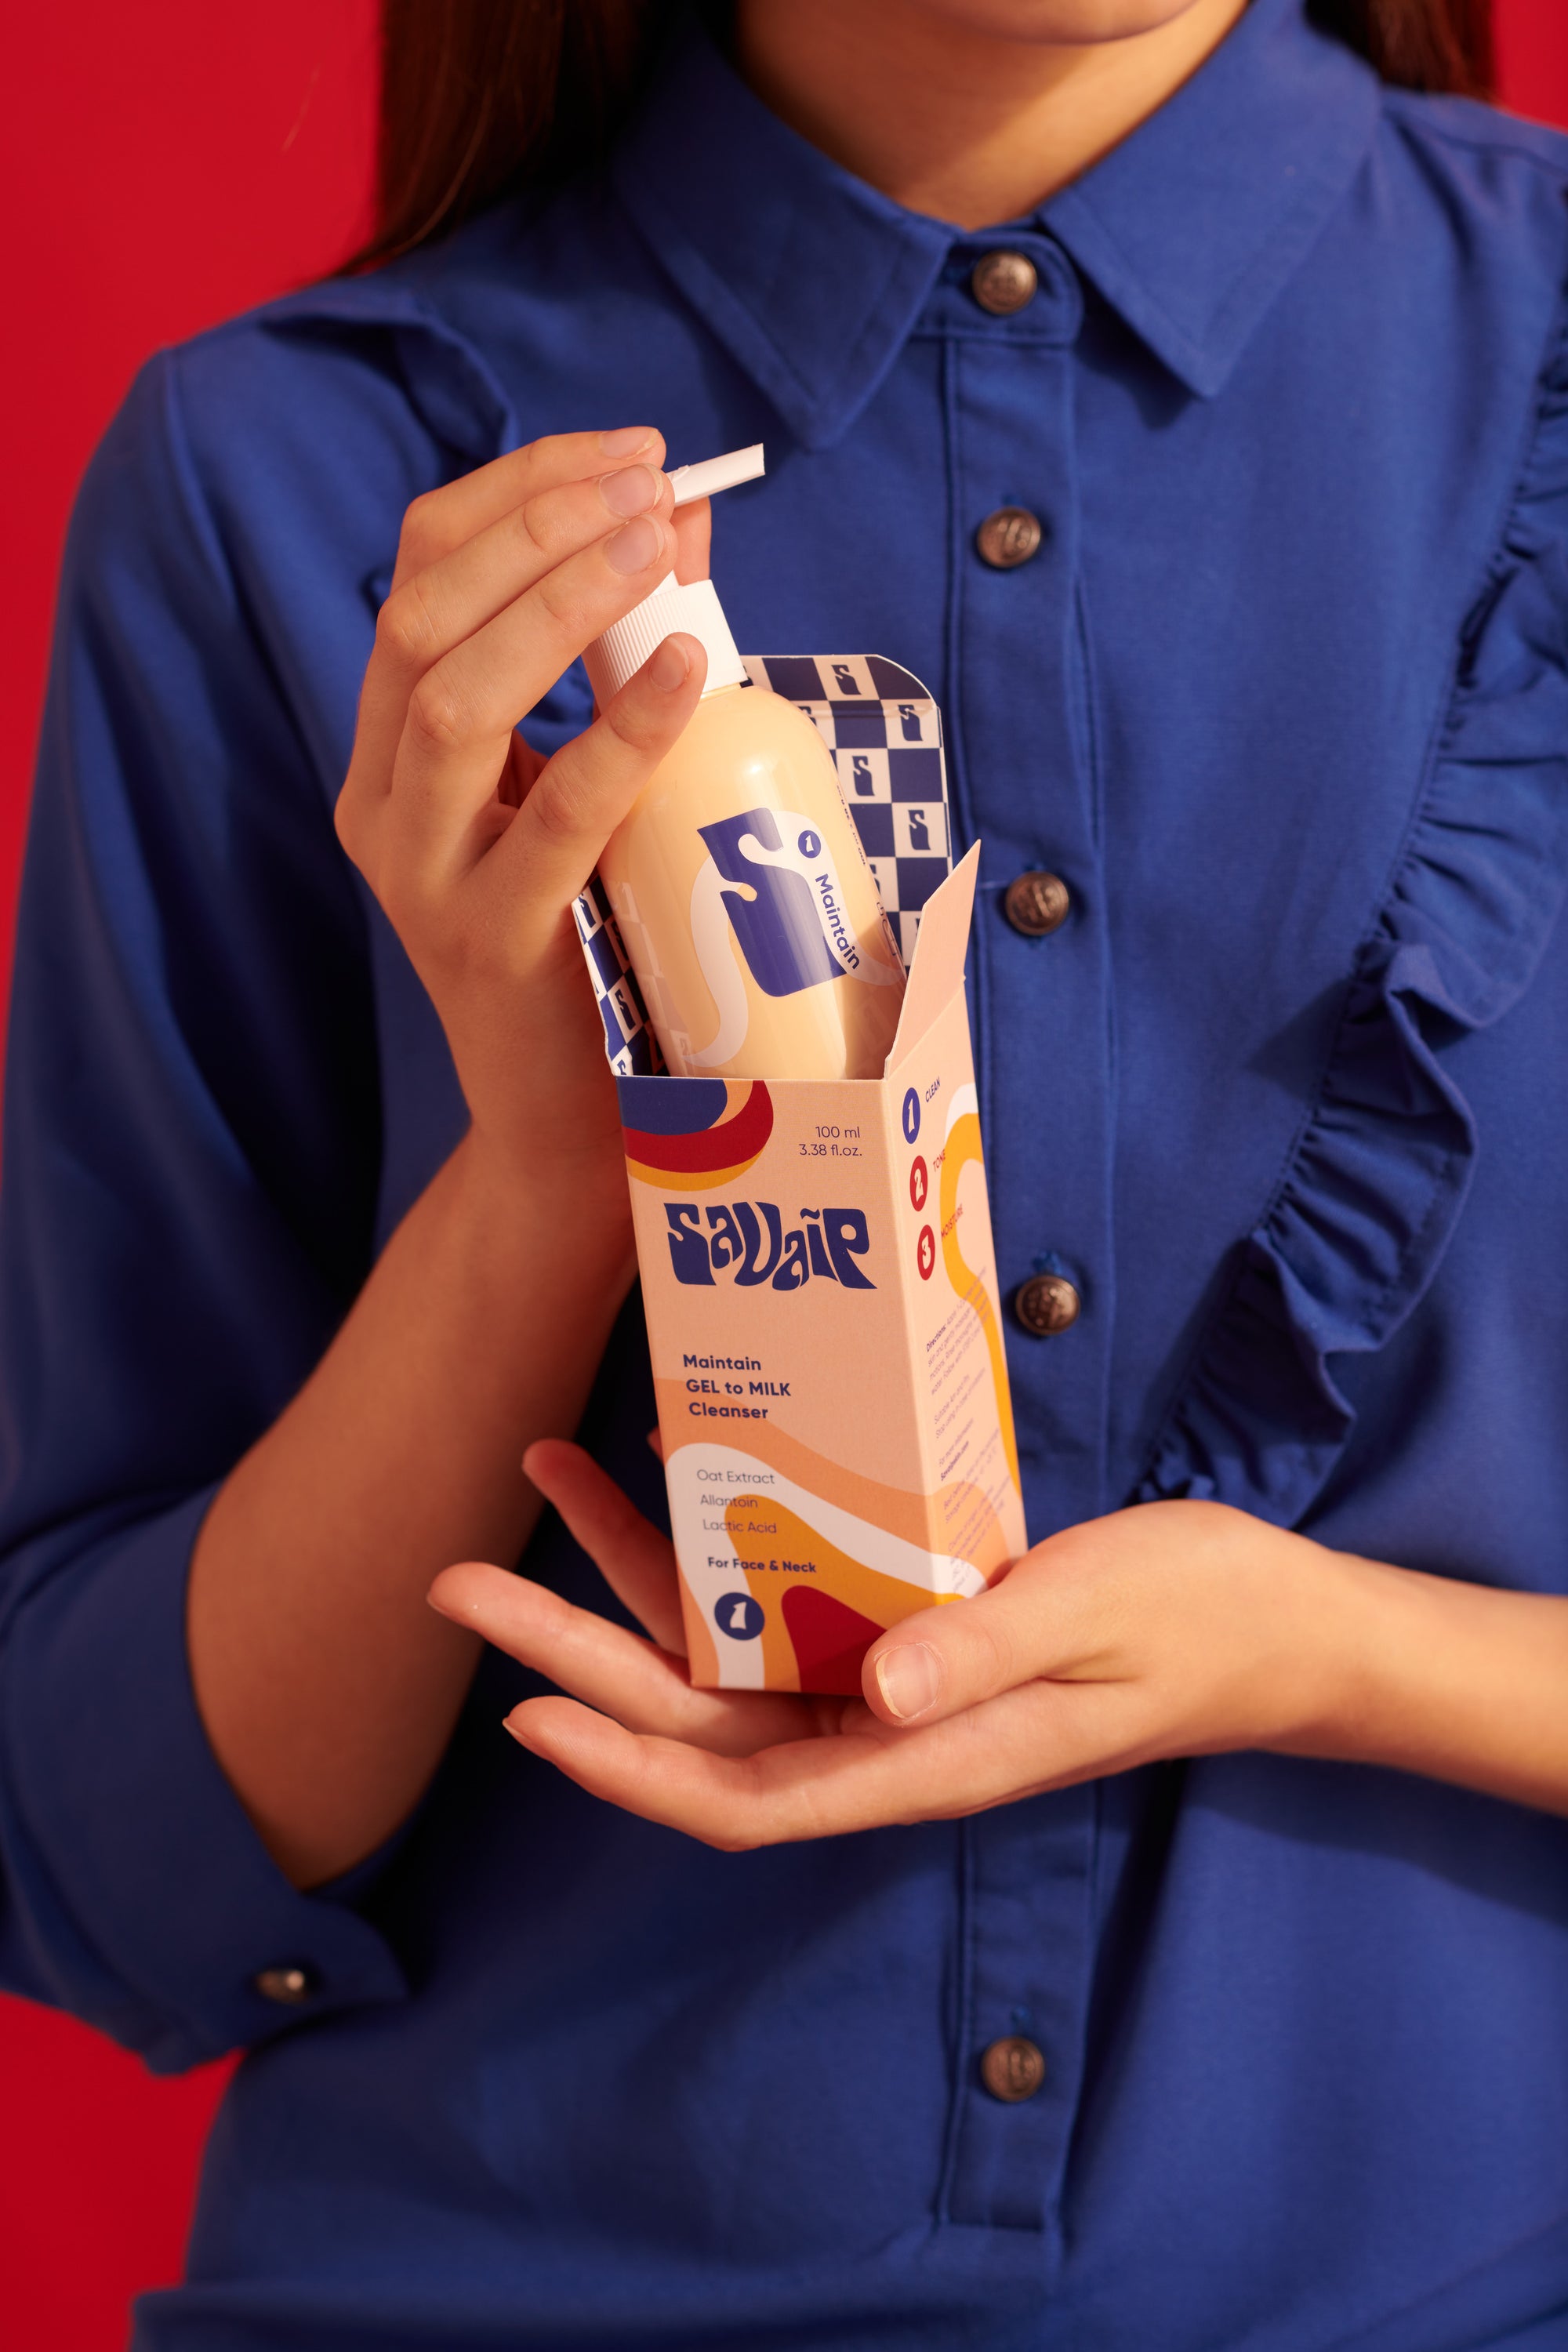 A person in a blue shirt holding a peach-colored Savaip skincare bottle labeled "GEL to MILK Cleanser" with details like Oat Extract, Allantoin and Lactic Acid on the packaging, set against a vibrant red background.